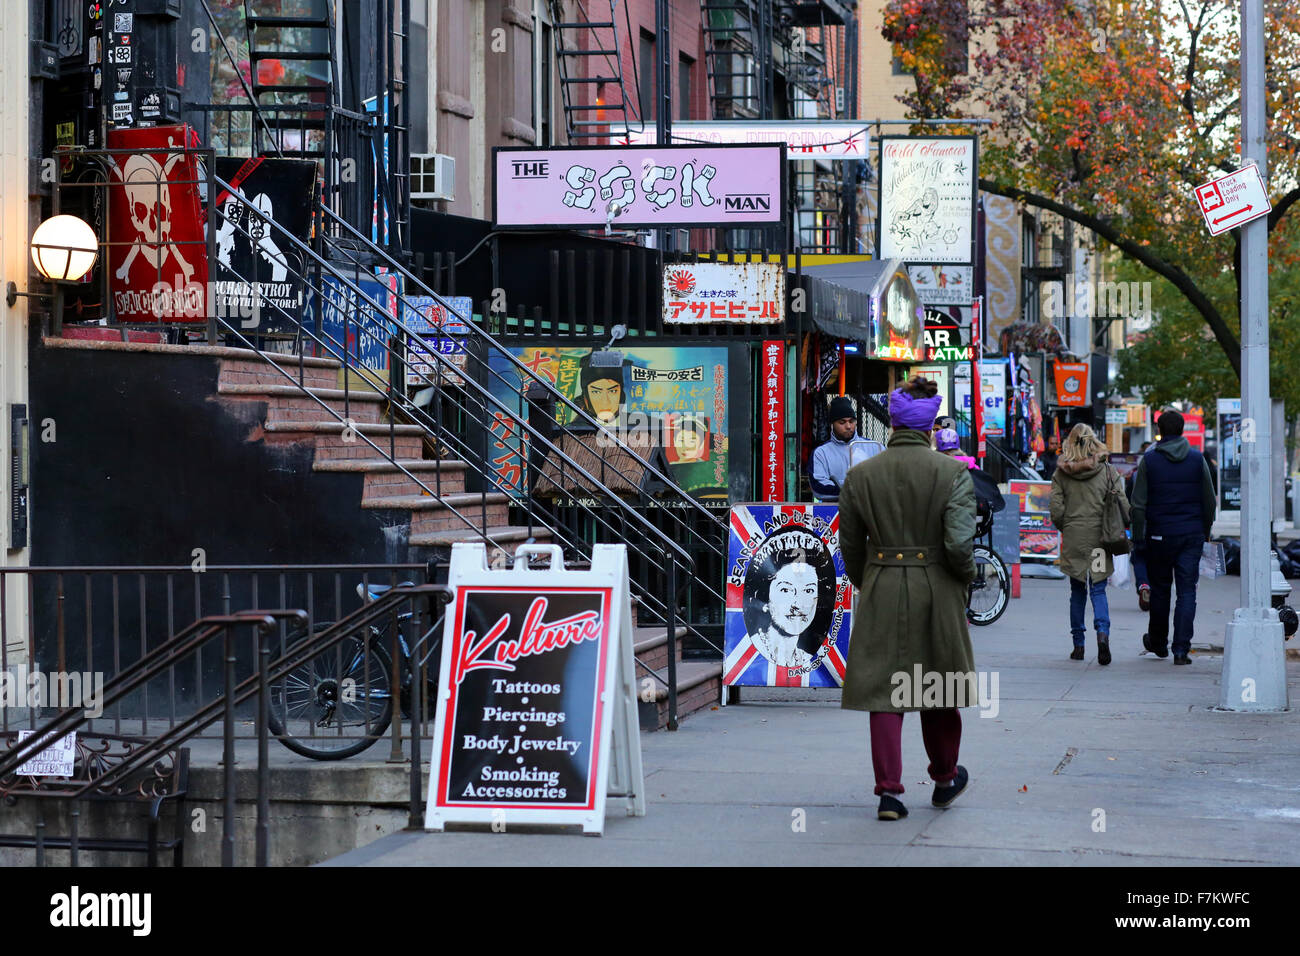 People walking down St. Marks Place in the East Village neighborhood of Manhattan, New York, NY. Stock Photo